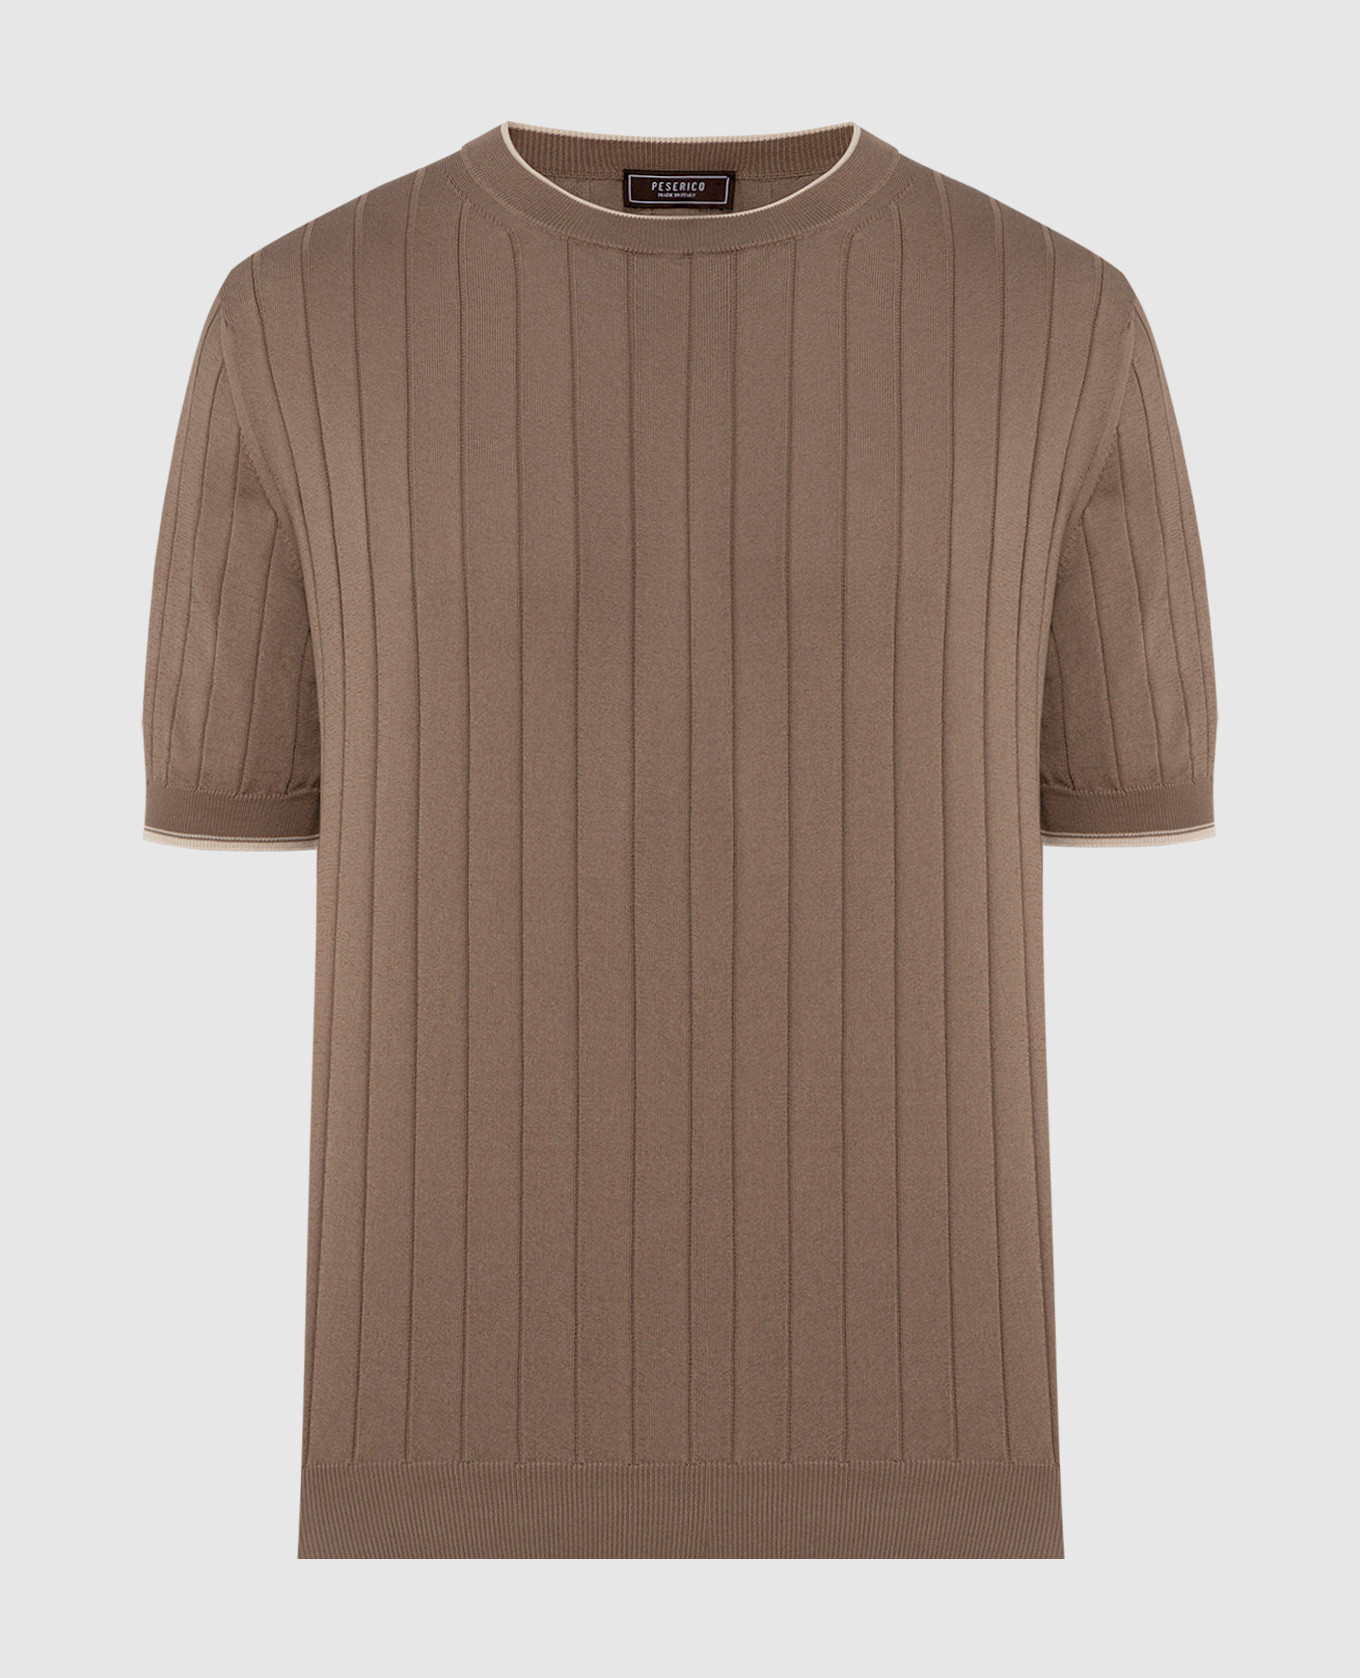 Brown t-shirt in a textured pattern